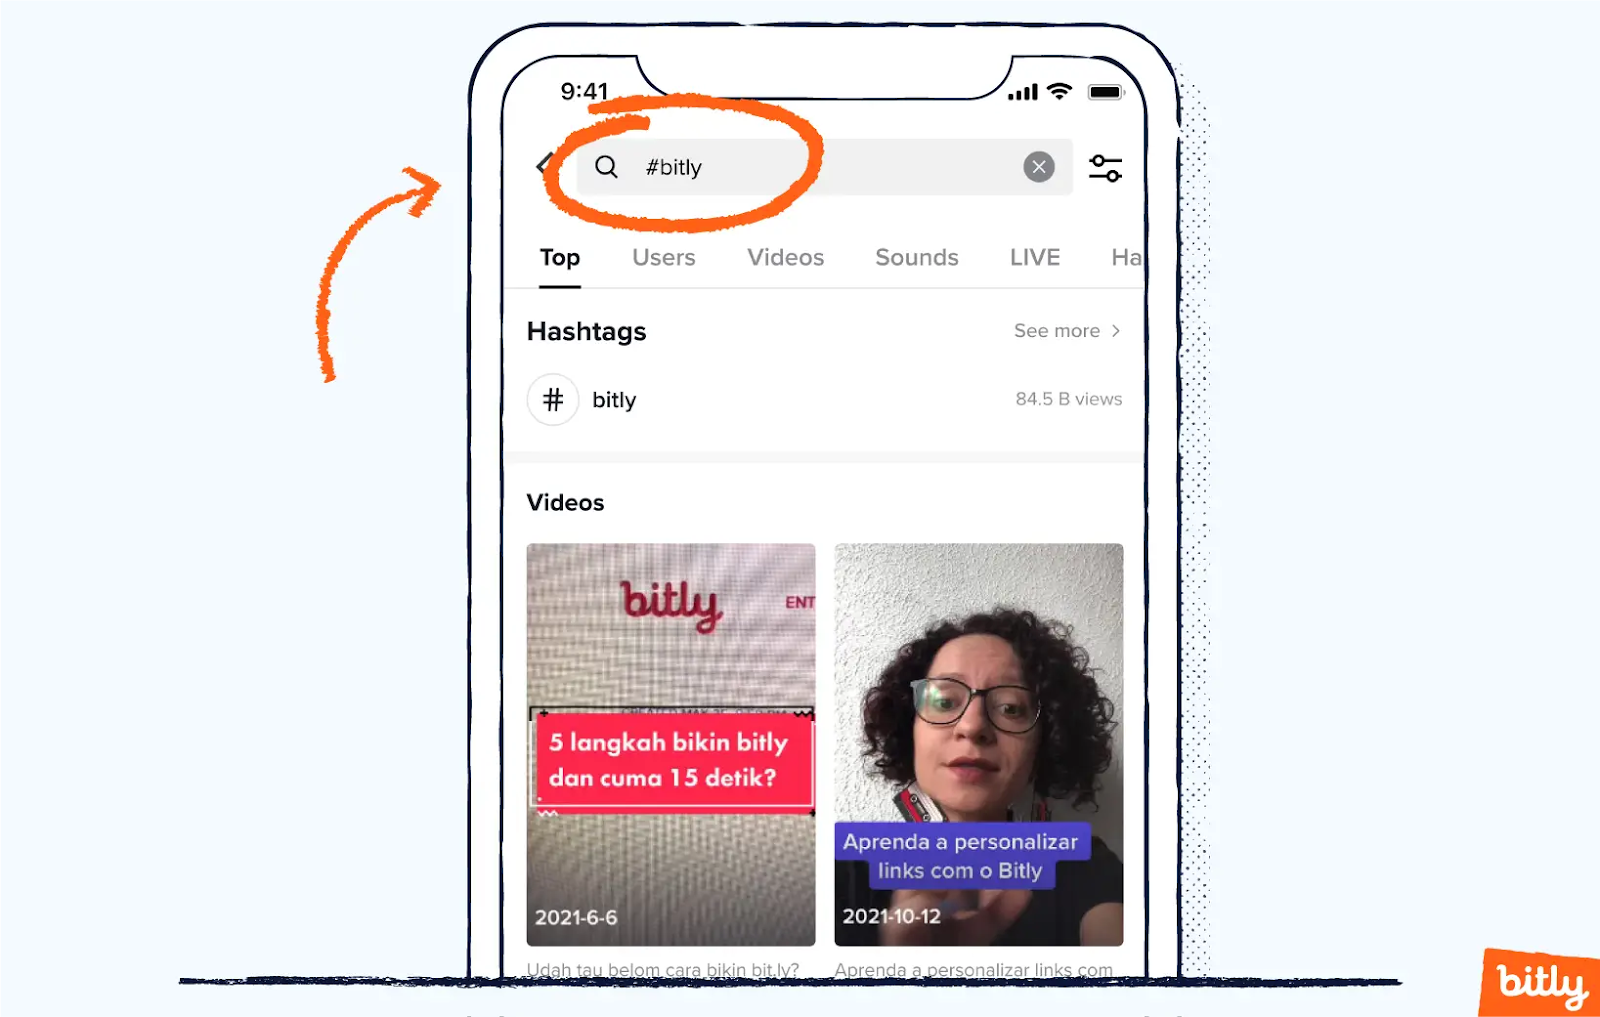 A screenshot showing what comes up when searching for #bitly on TikTok.